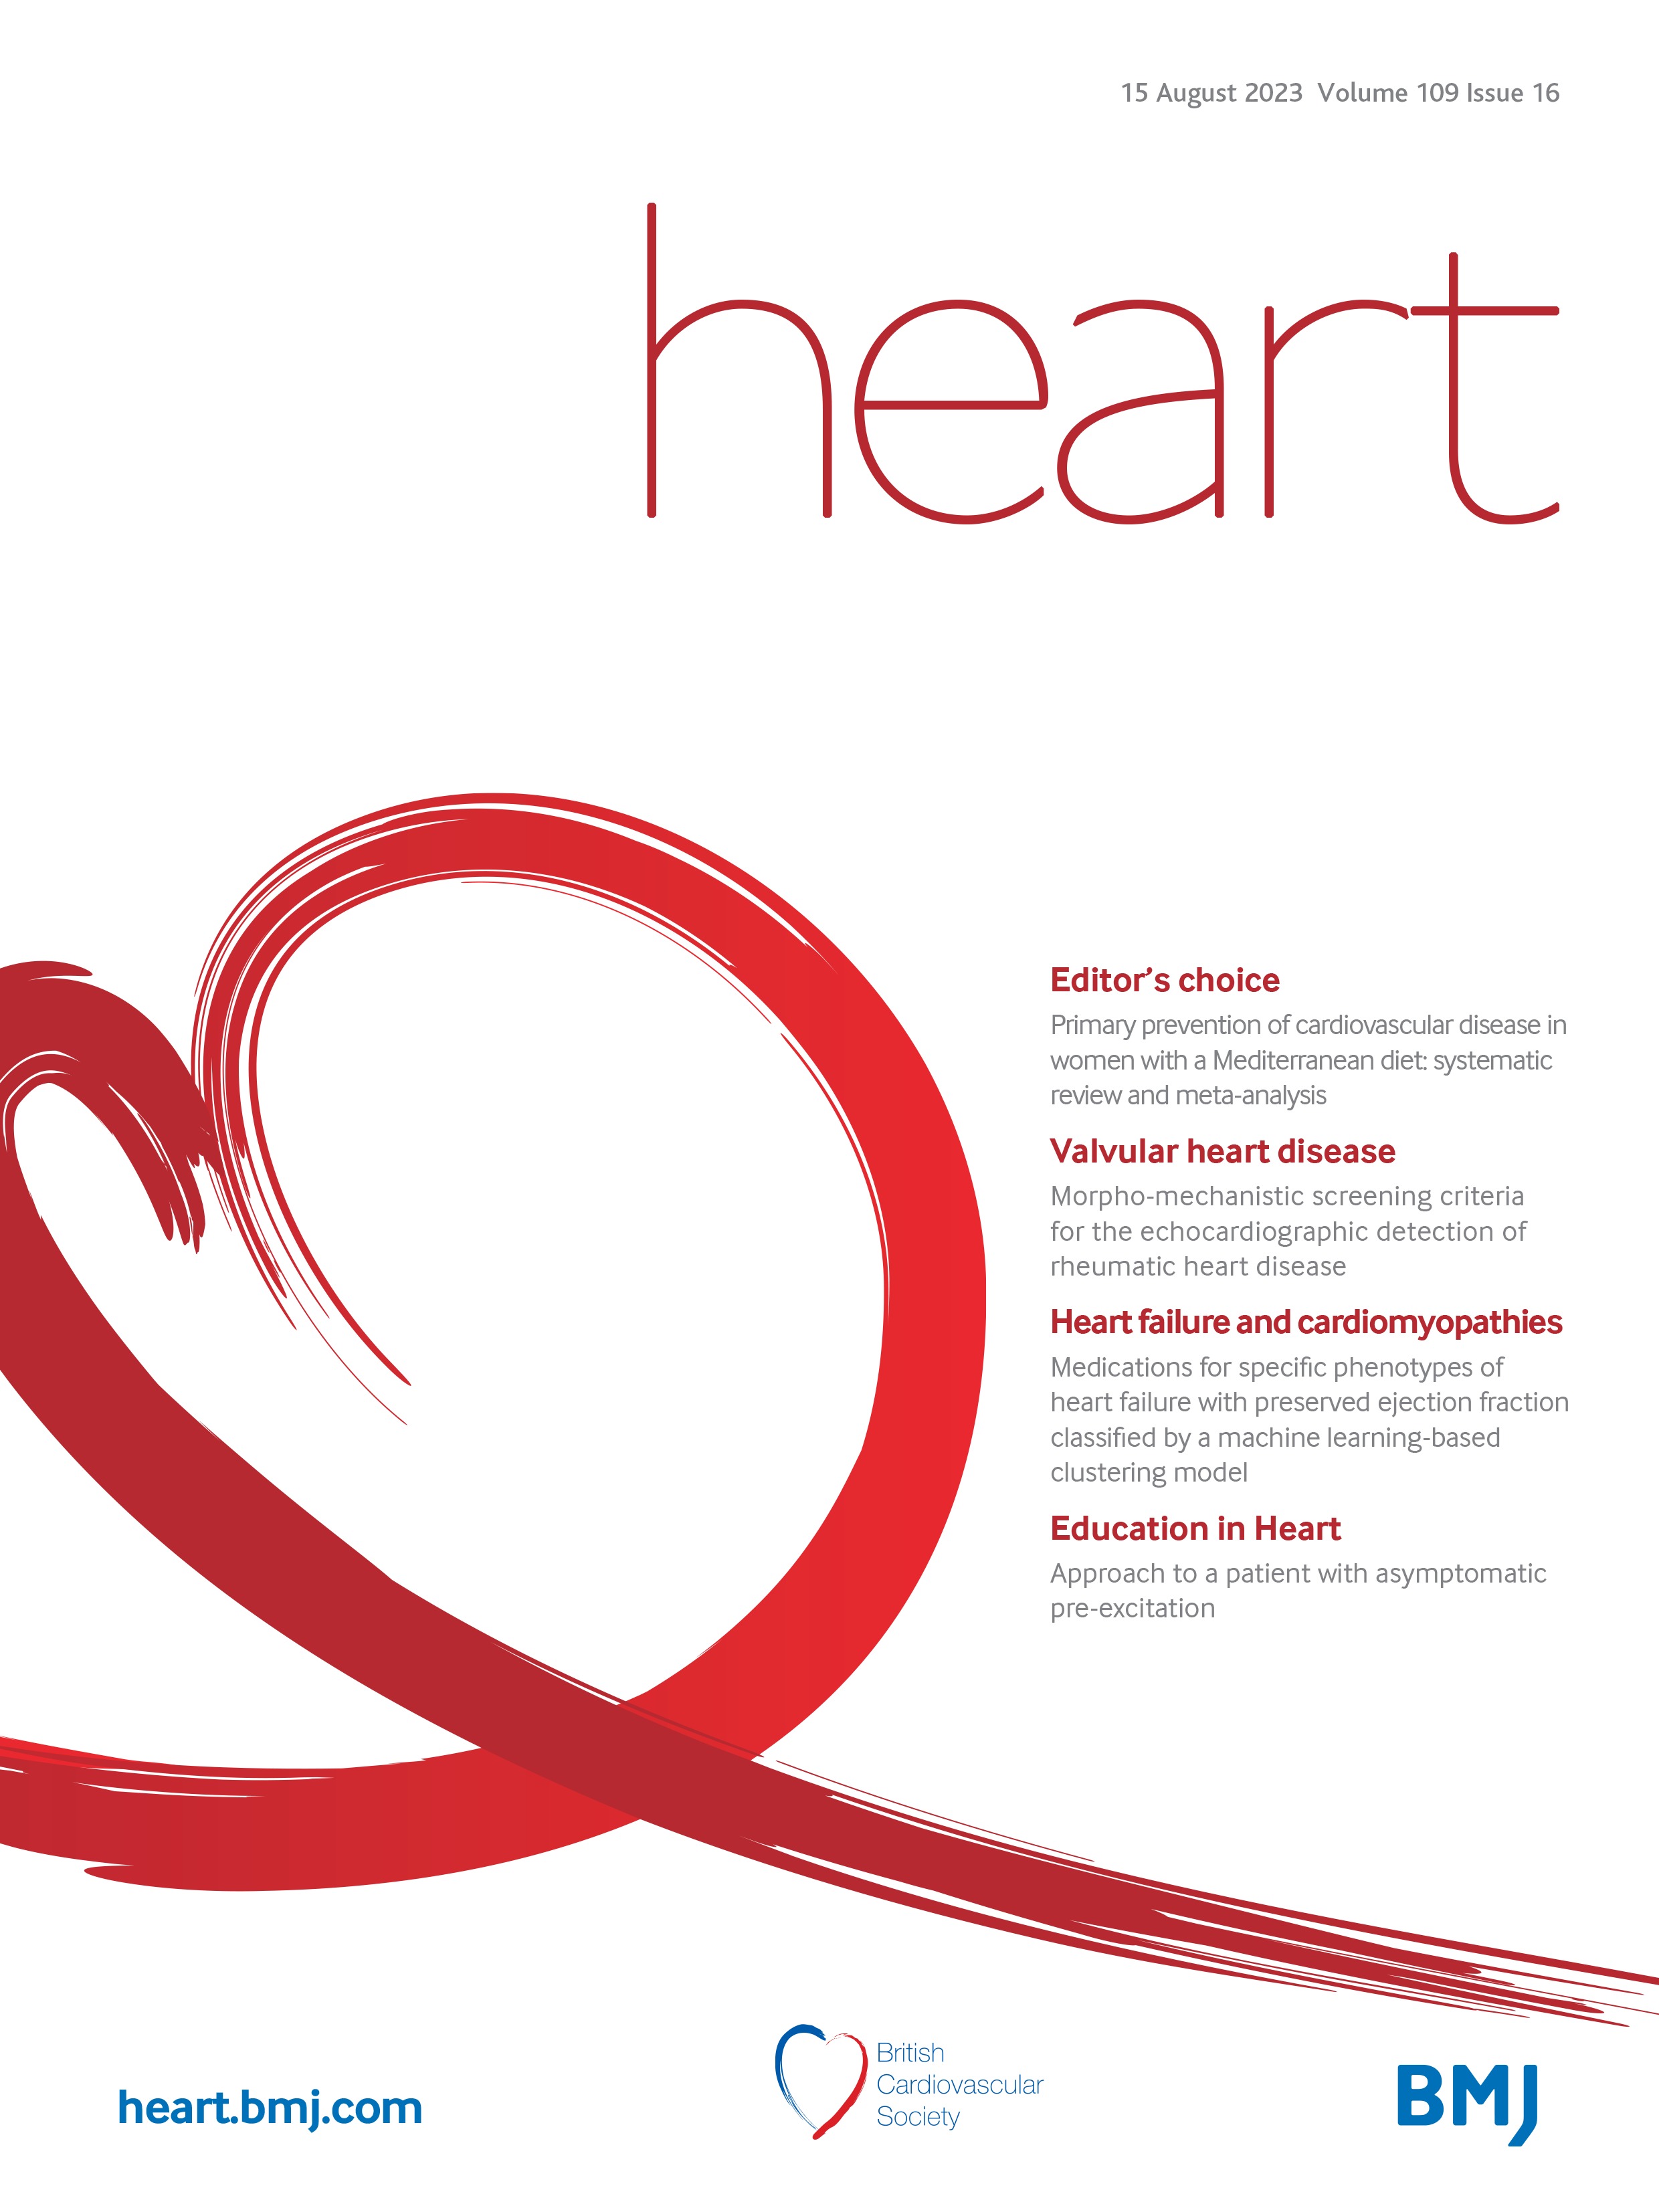 Refining morphological echocardiographic criteria to improve early detection of rheumatic heart disease